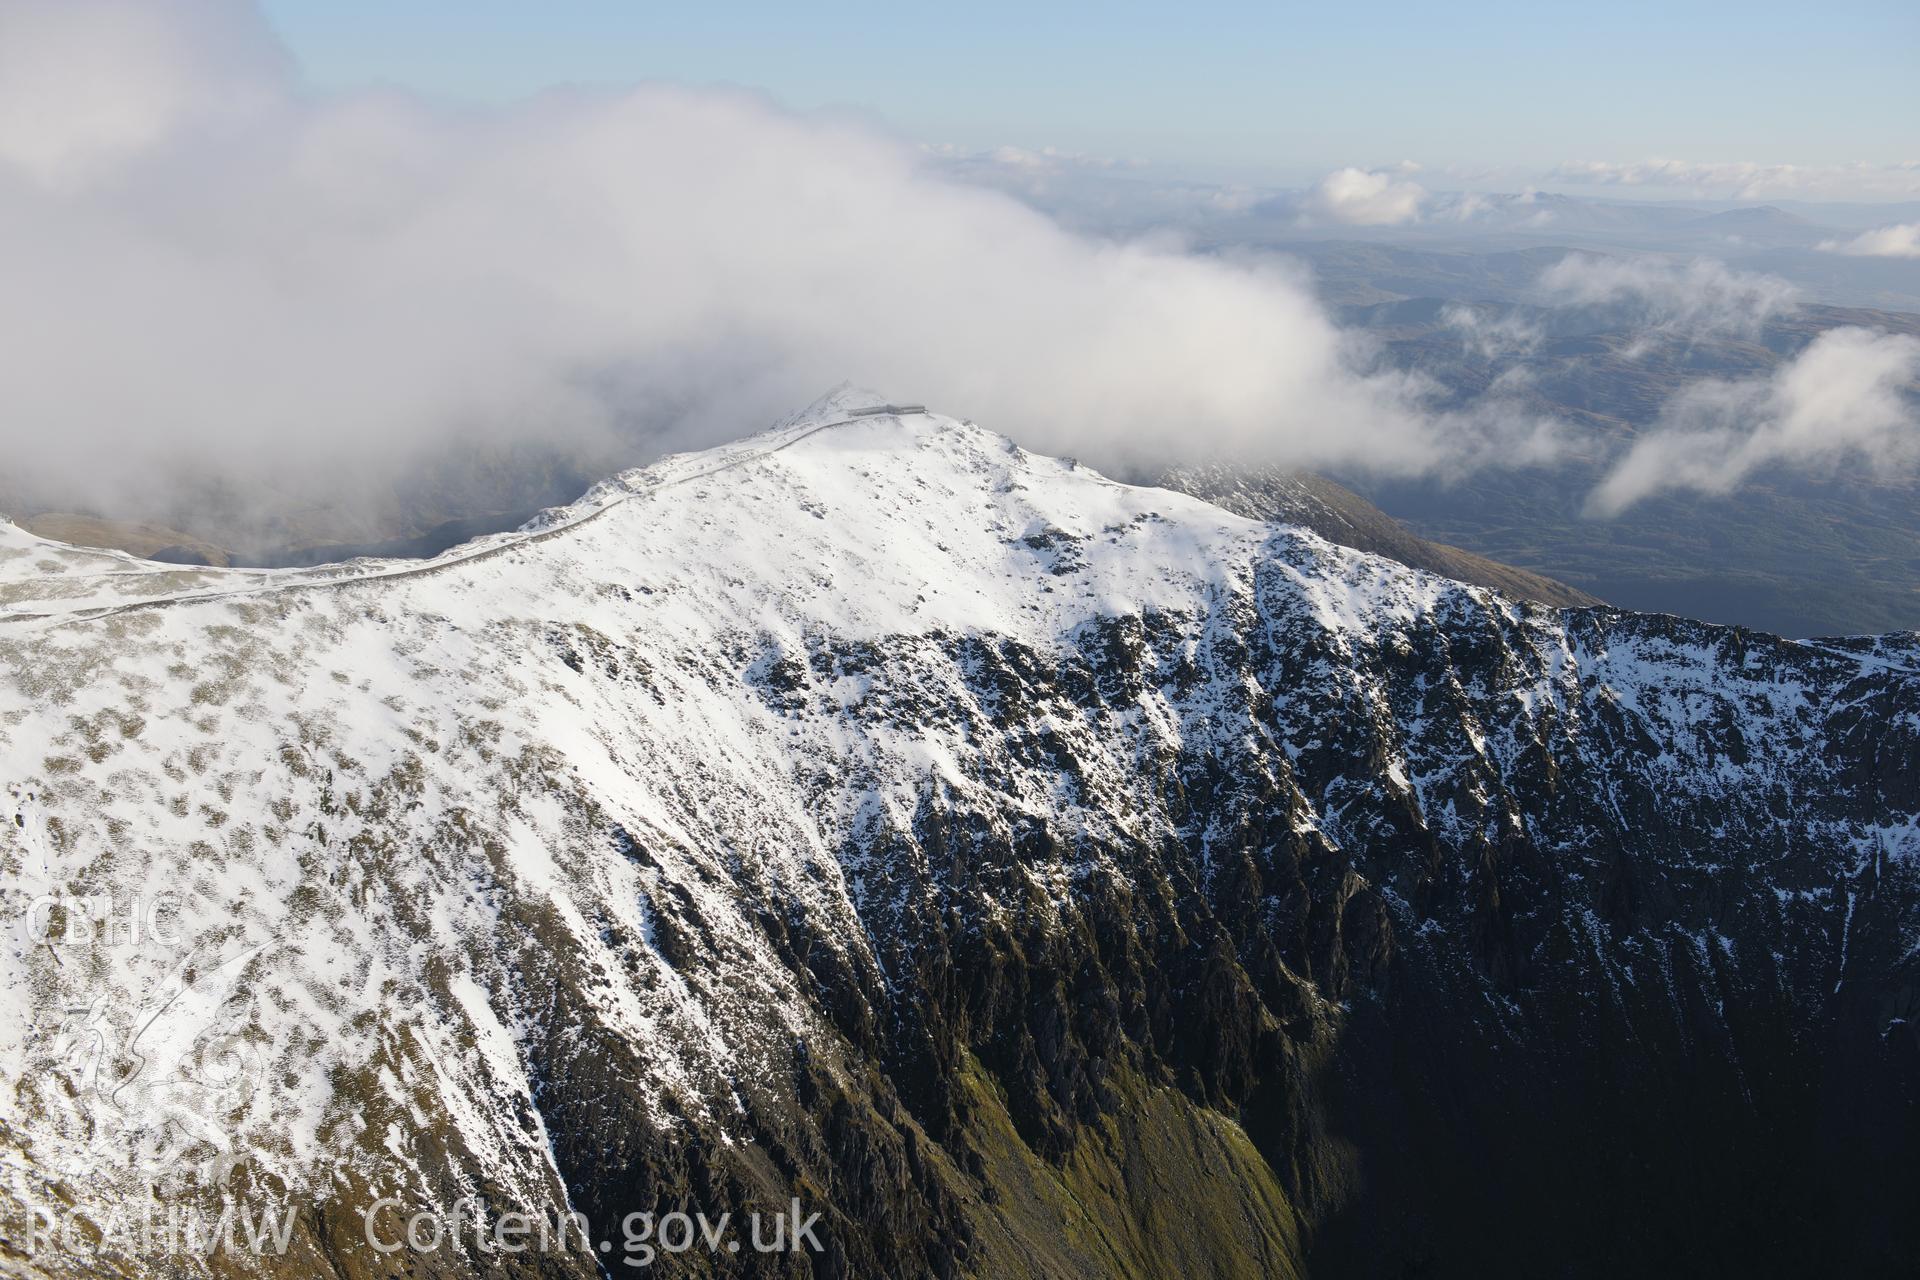 RCAHMW colour oblique photograph of Snowdon range, with Snowdon summit from the northwest, under snow. Taken by Toby Driver on 10/12/2012.